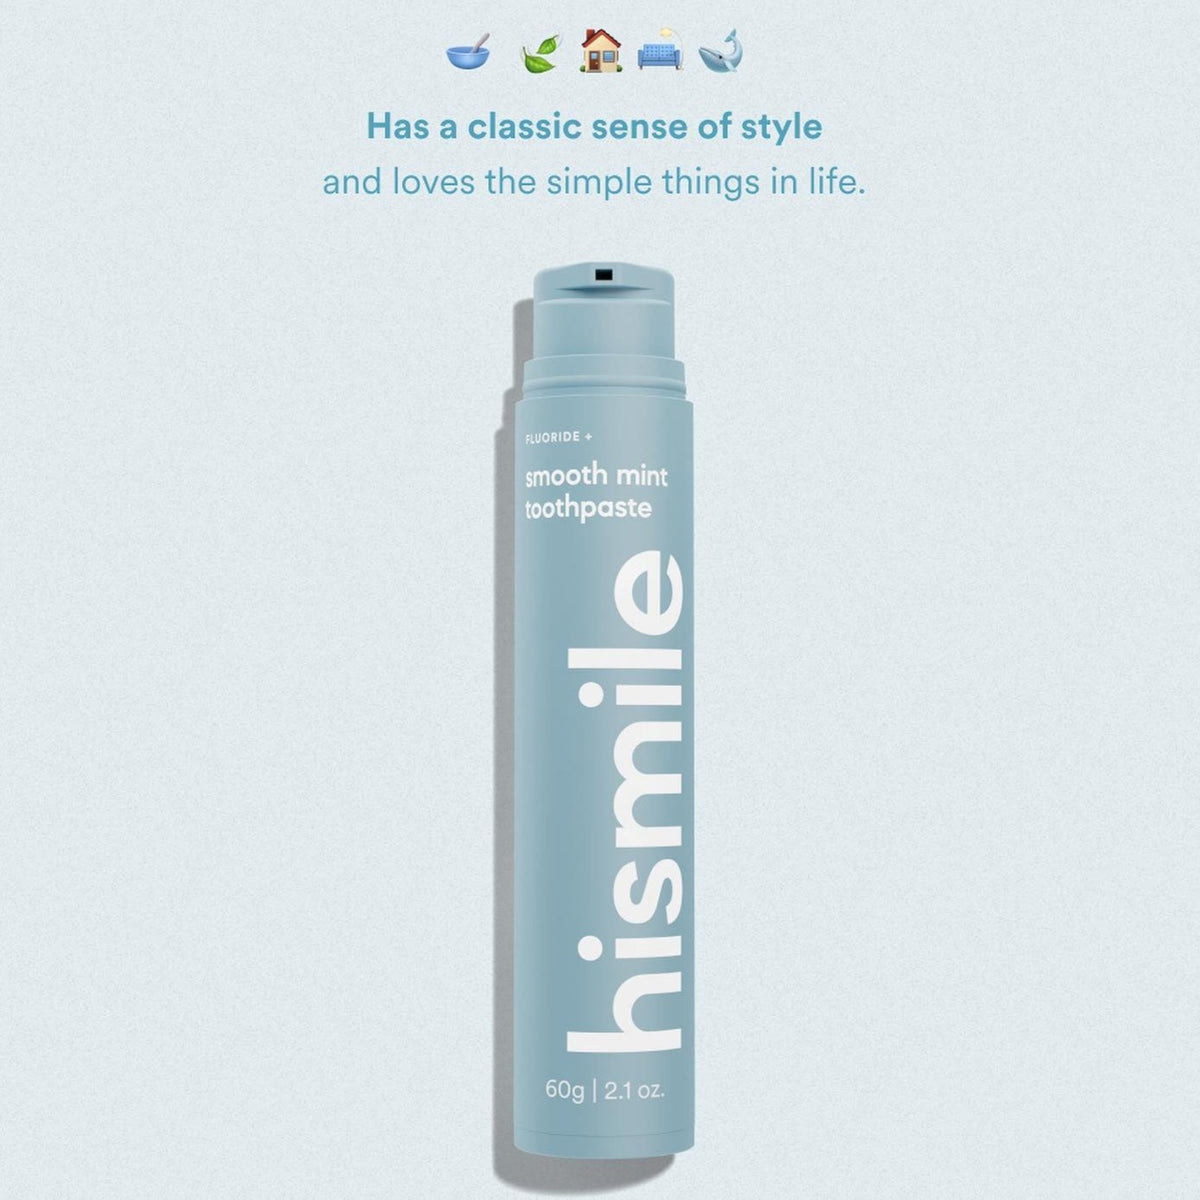 Say Goodbye To Boring Toothpaste With HiSmile!